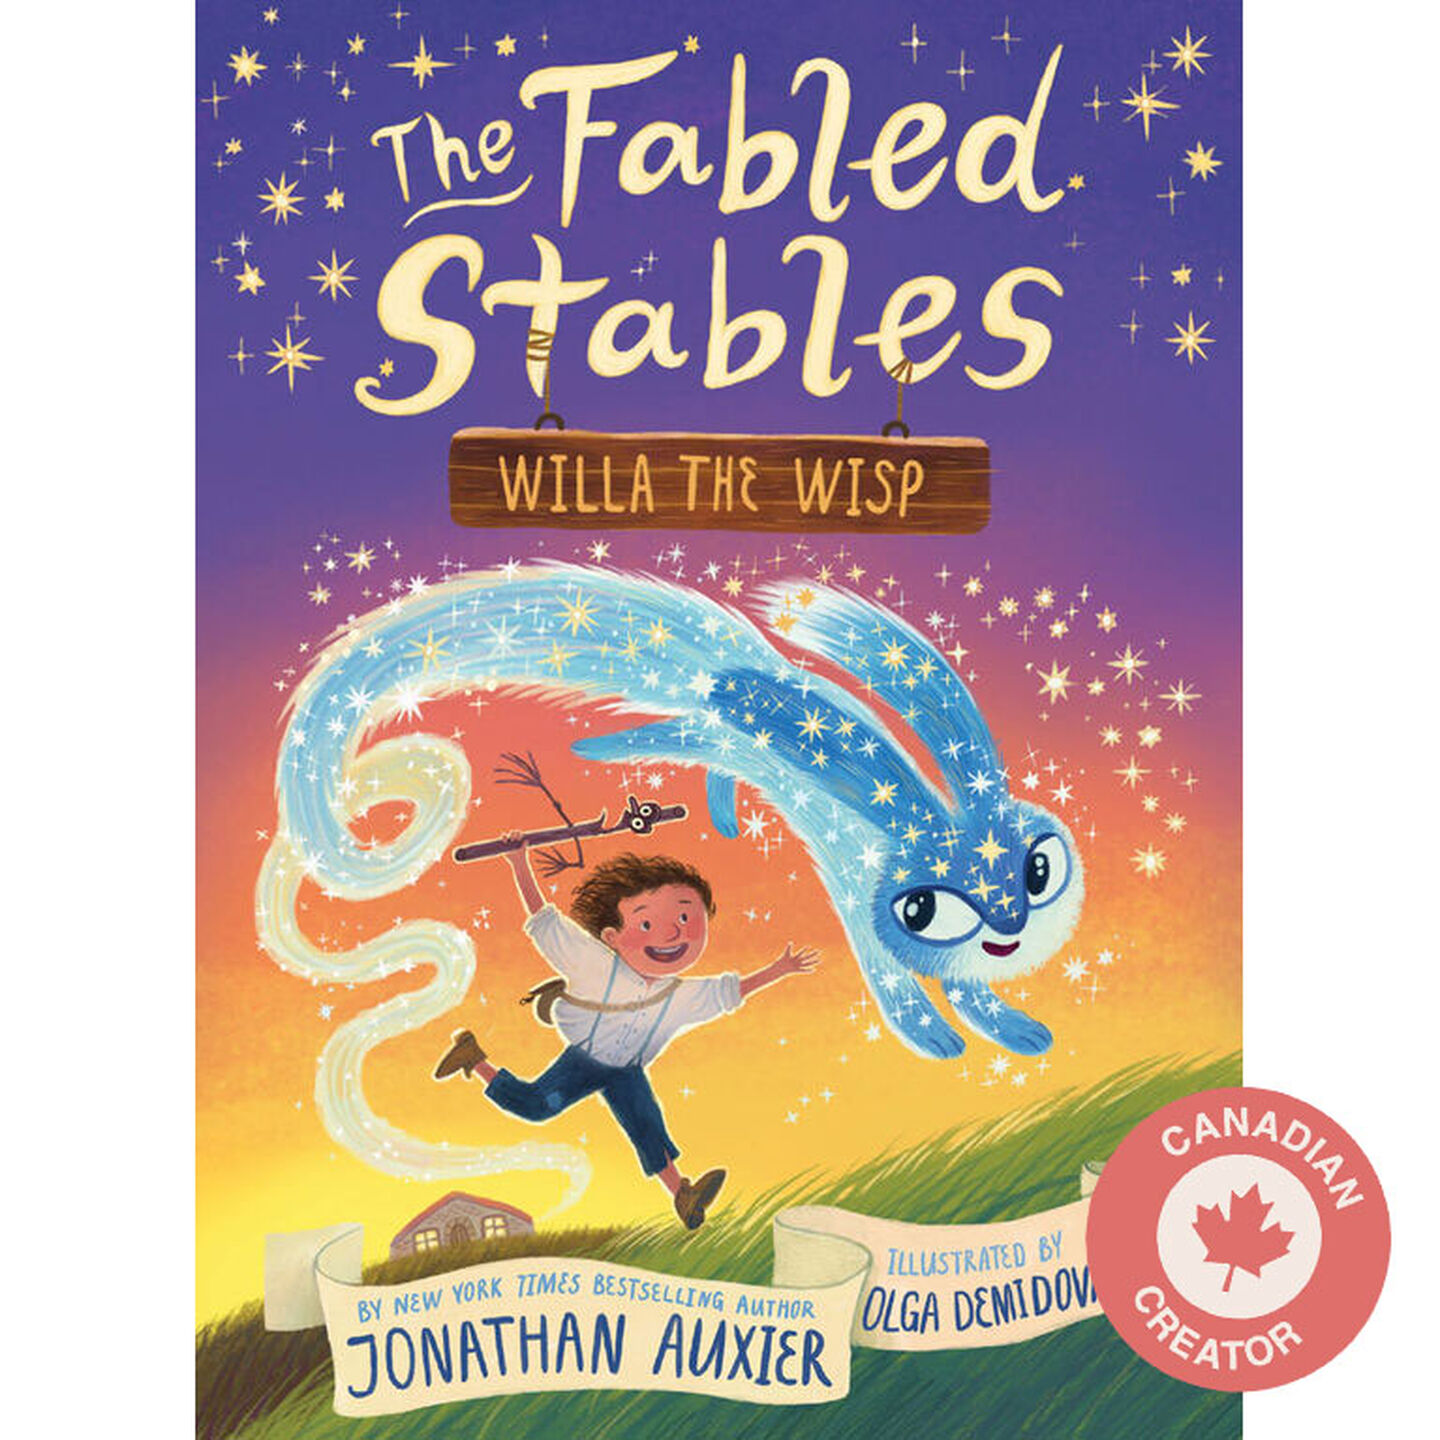 The Fabled Stables #1: Willa the Wisp